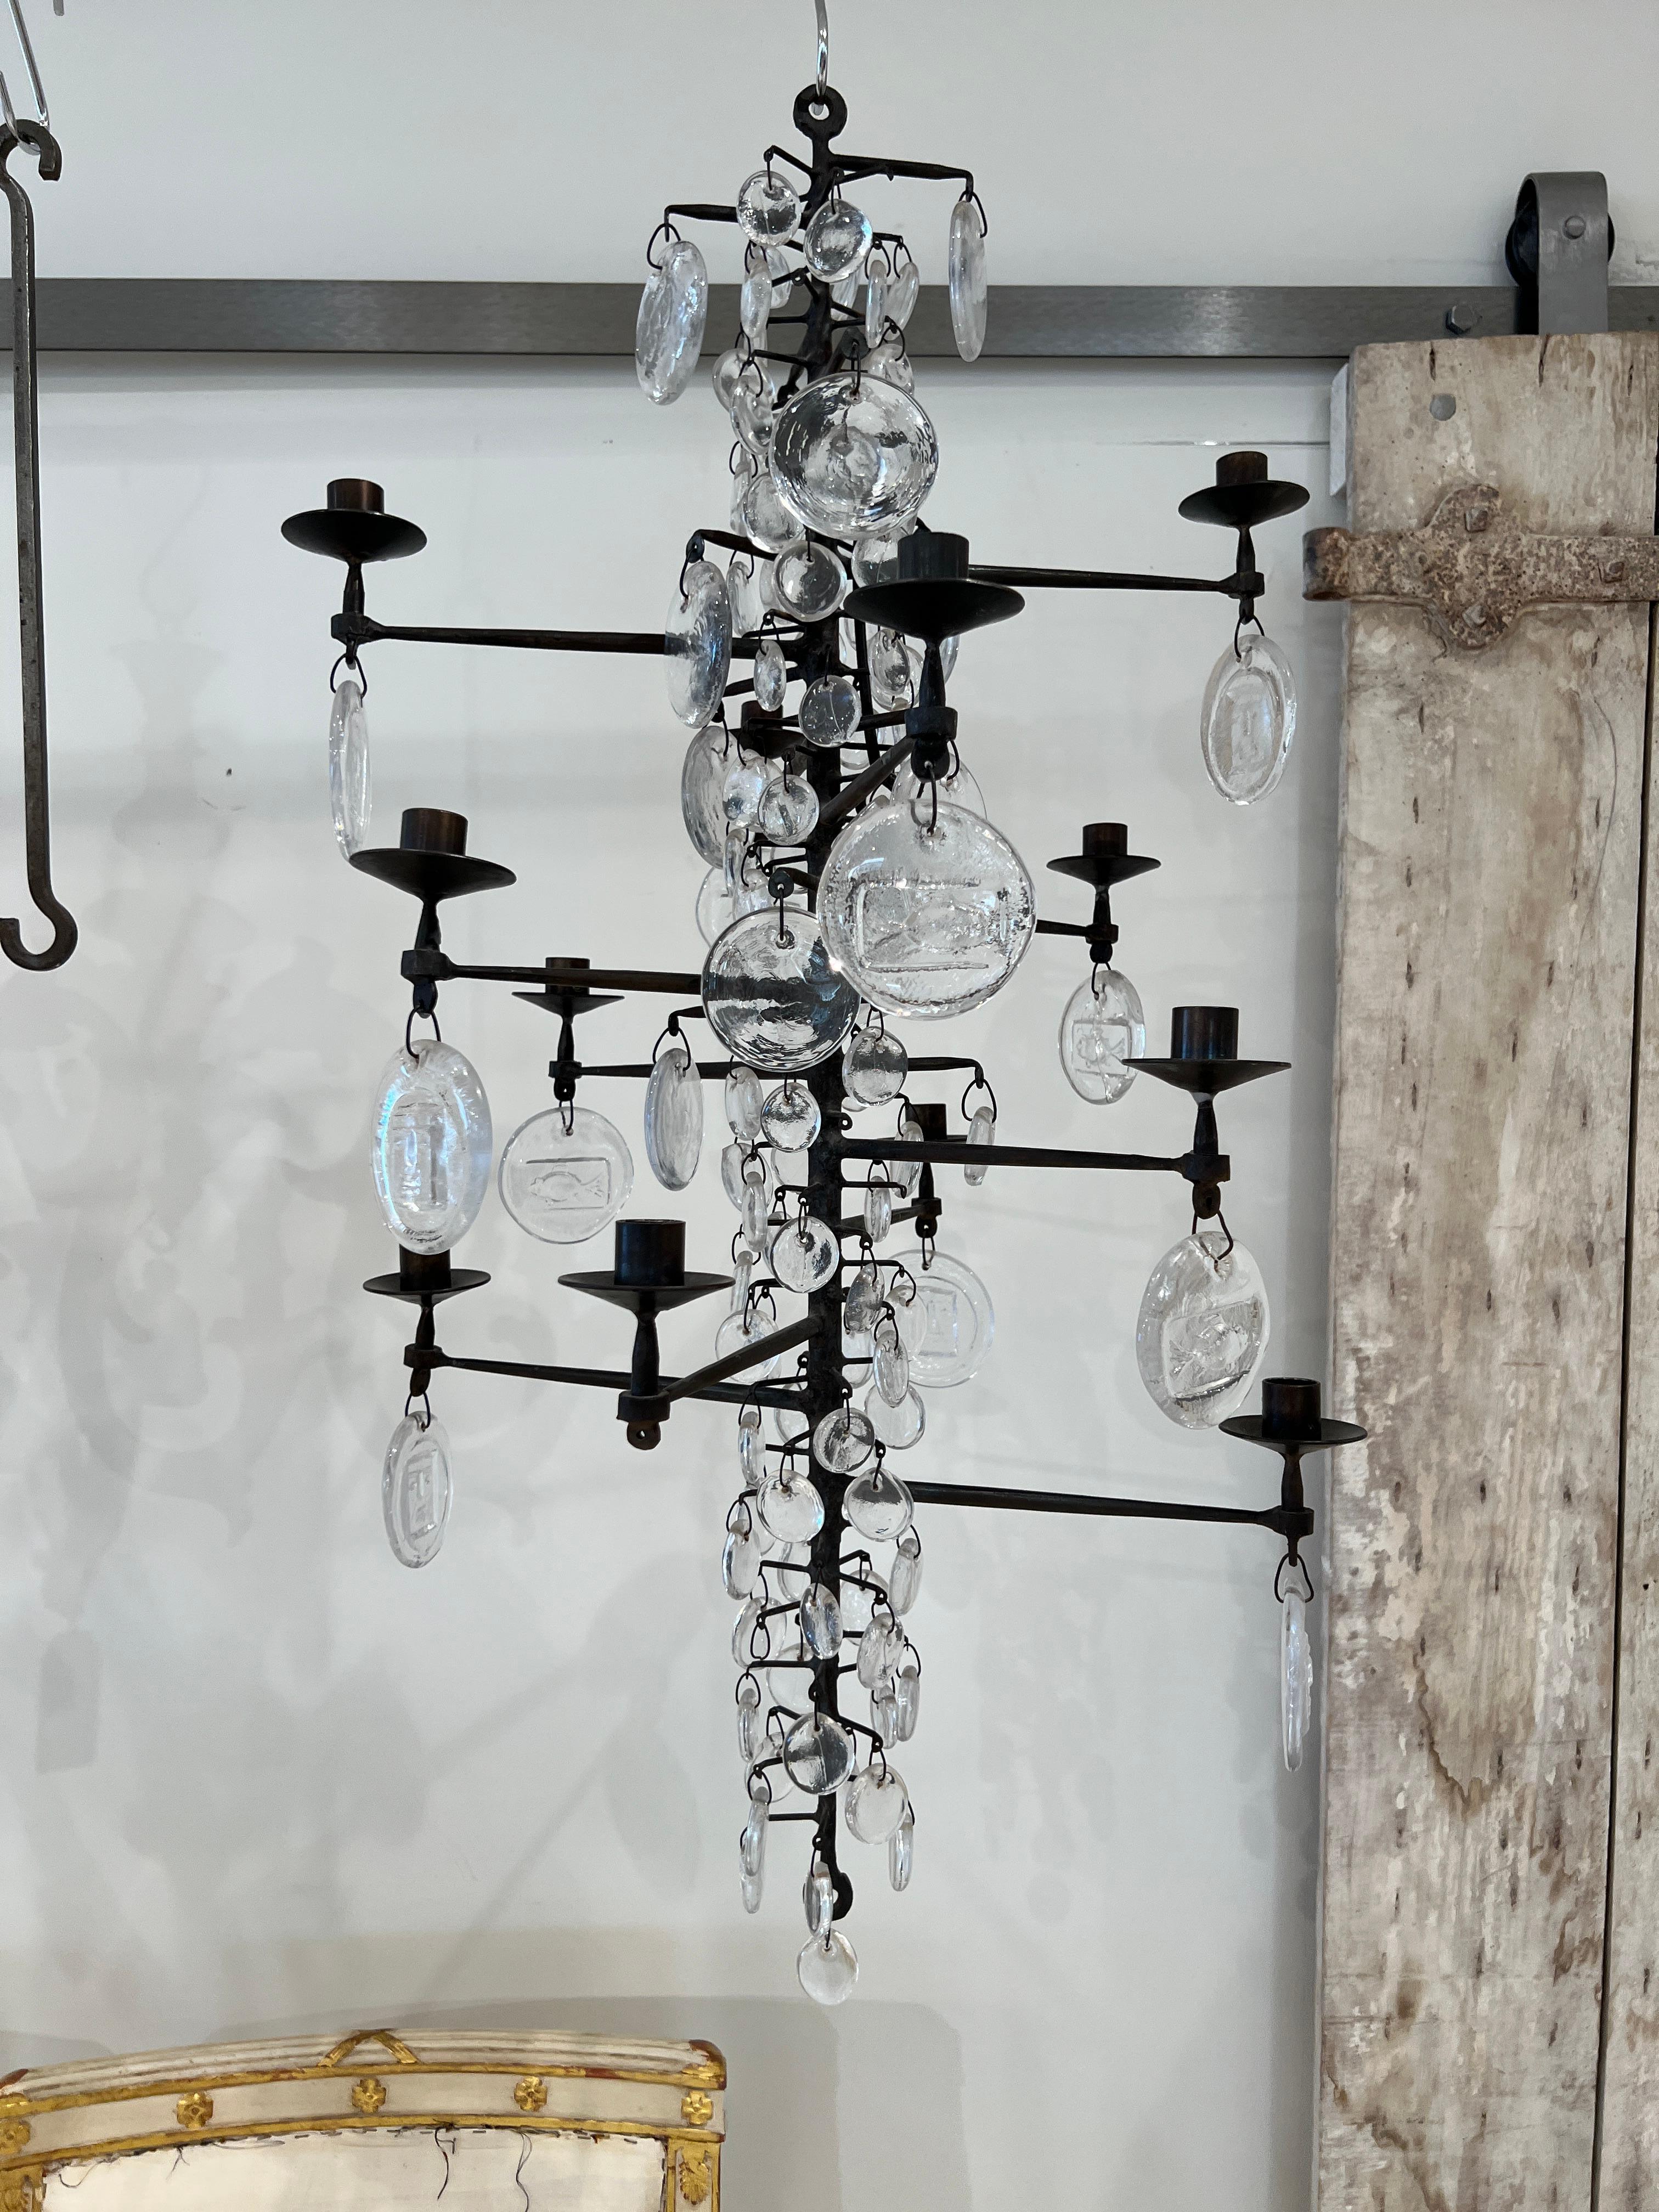 Classic midcentury chandelier by Erik Hoglund. Made of wrought iron and molded glass, this twelve-light chandelier was made by Erik Hoglund for Kosta Boca. There is one large and 4 small glass discs missing.  Not wired for electricity.